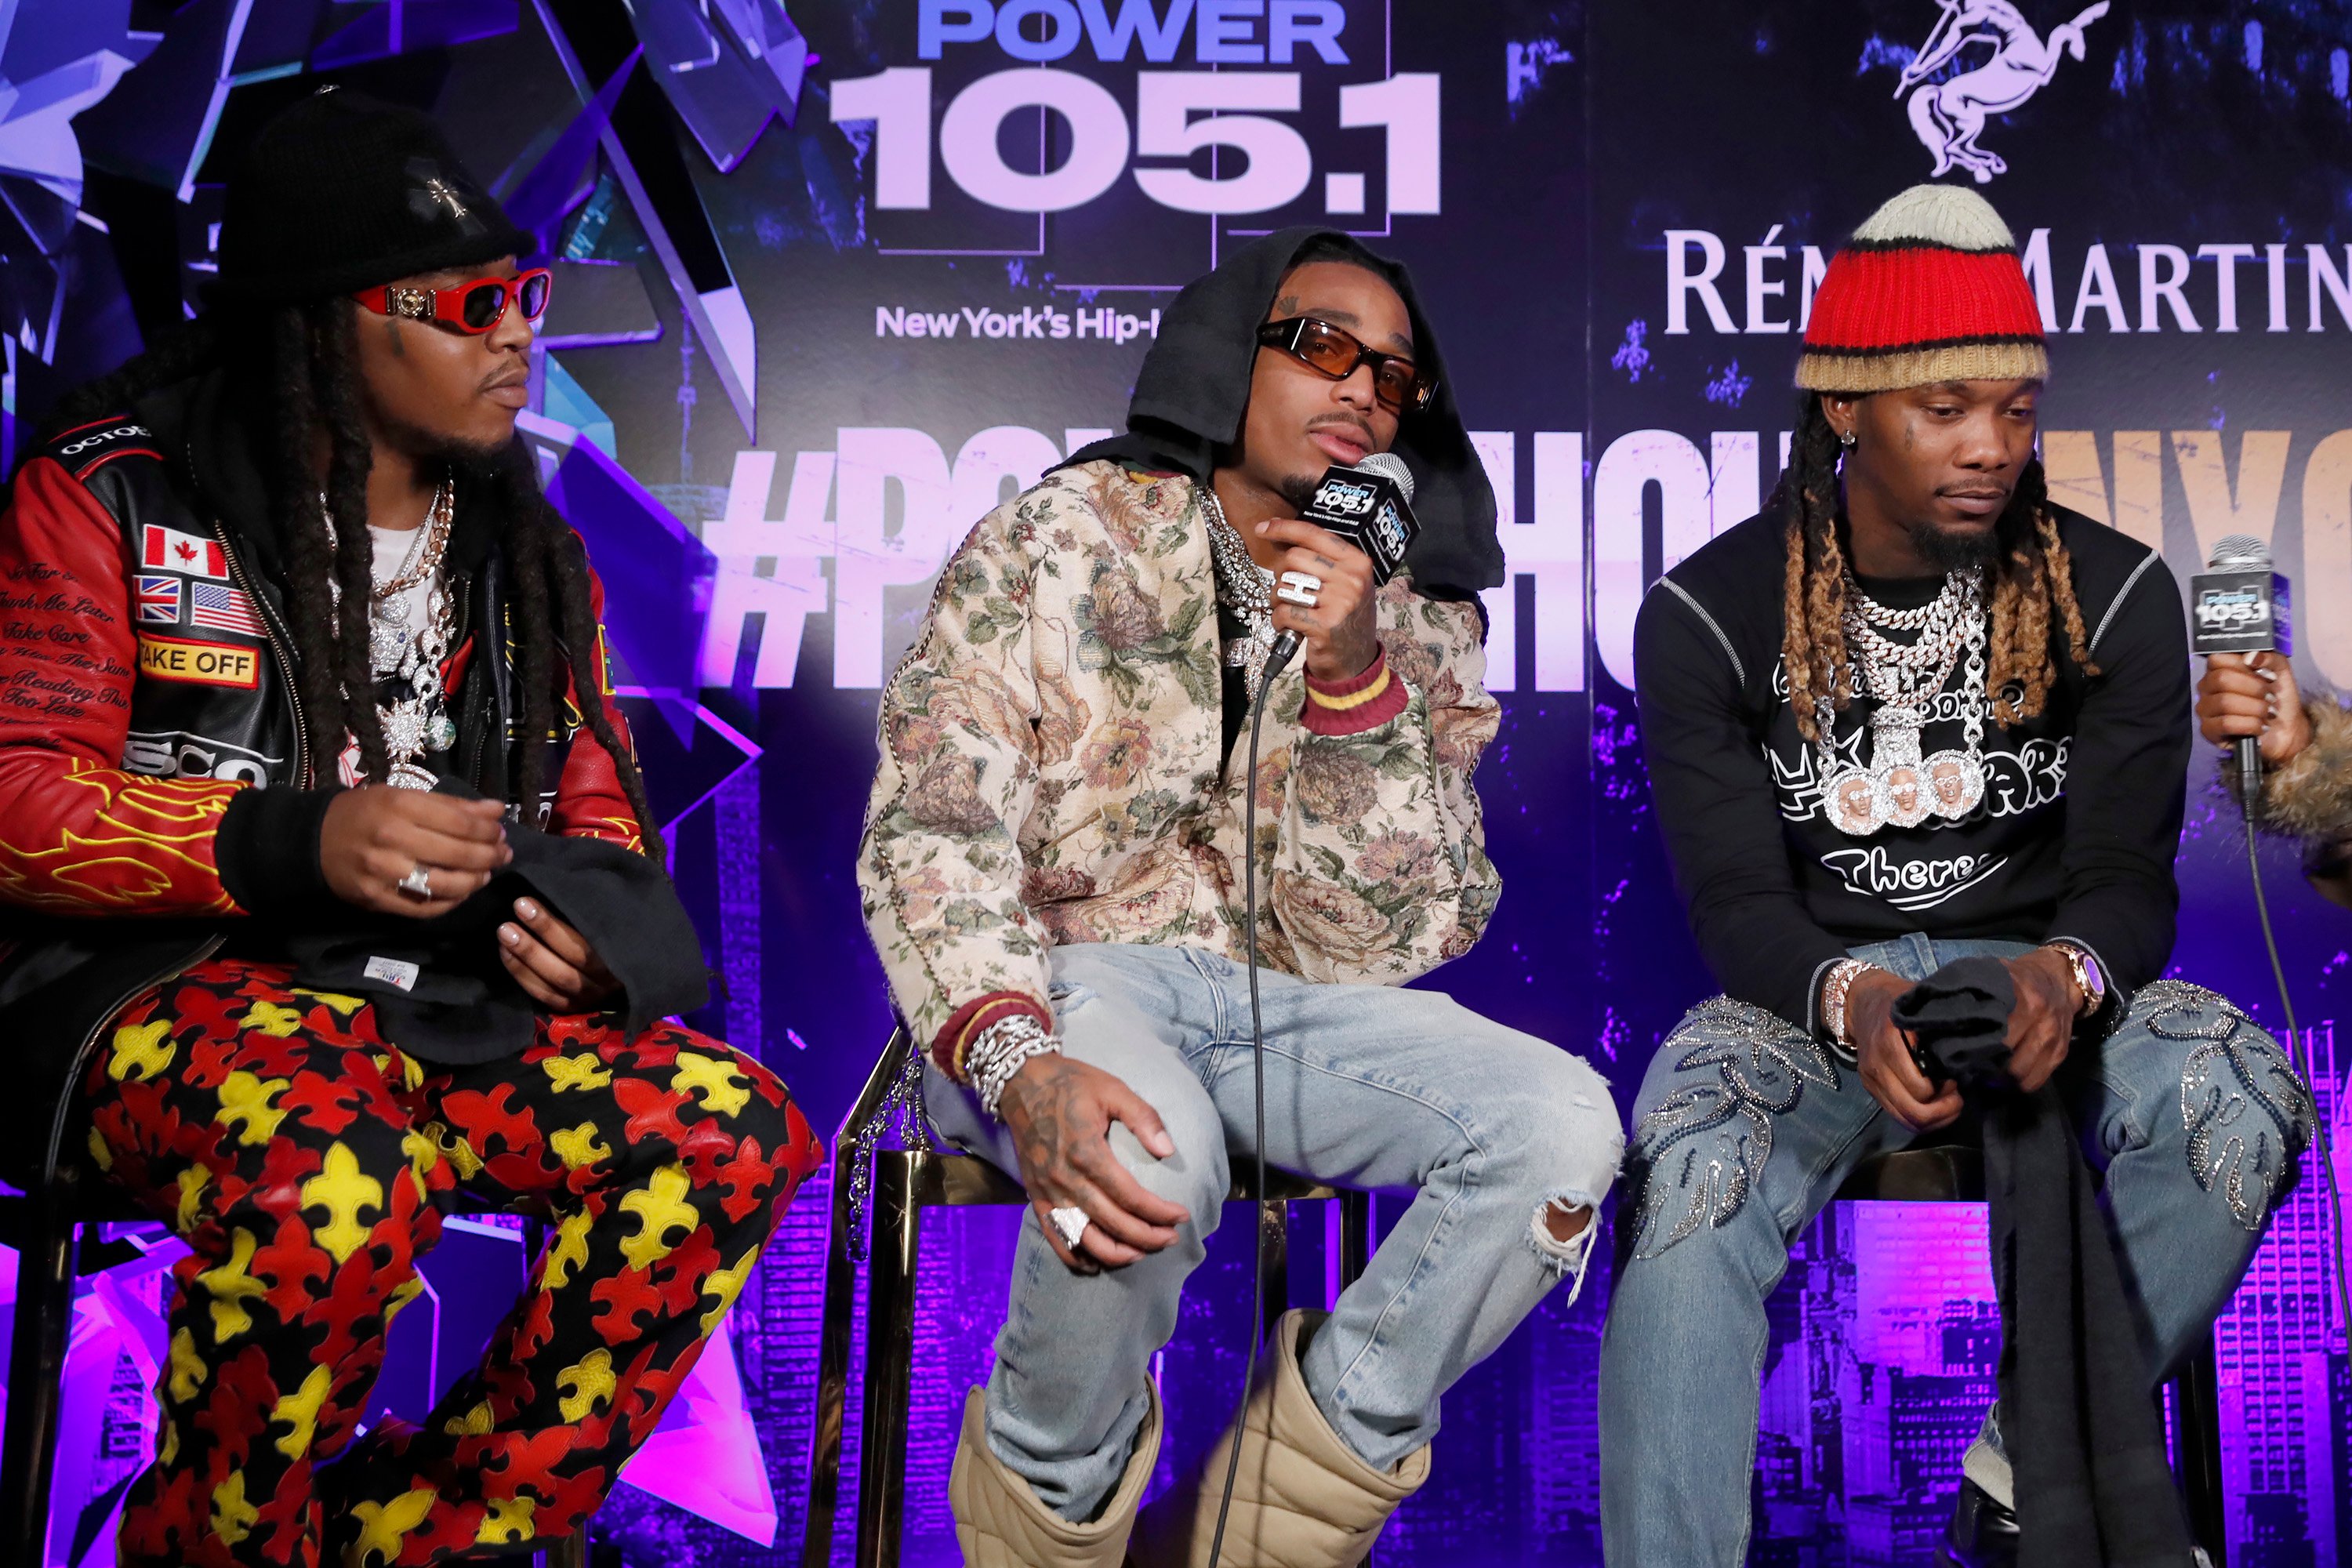 The members of Migos sit on chairs during a radio show appearance